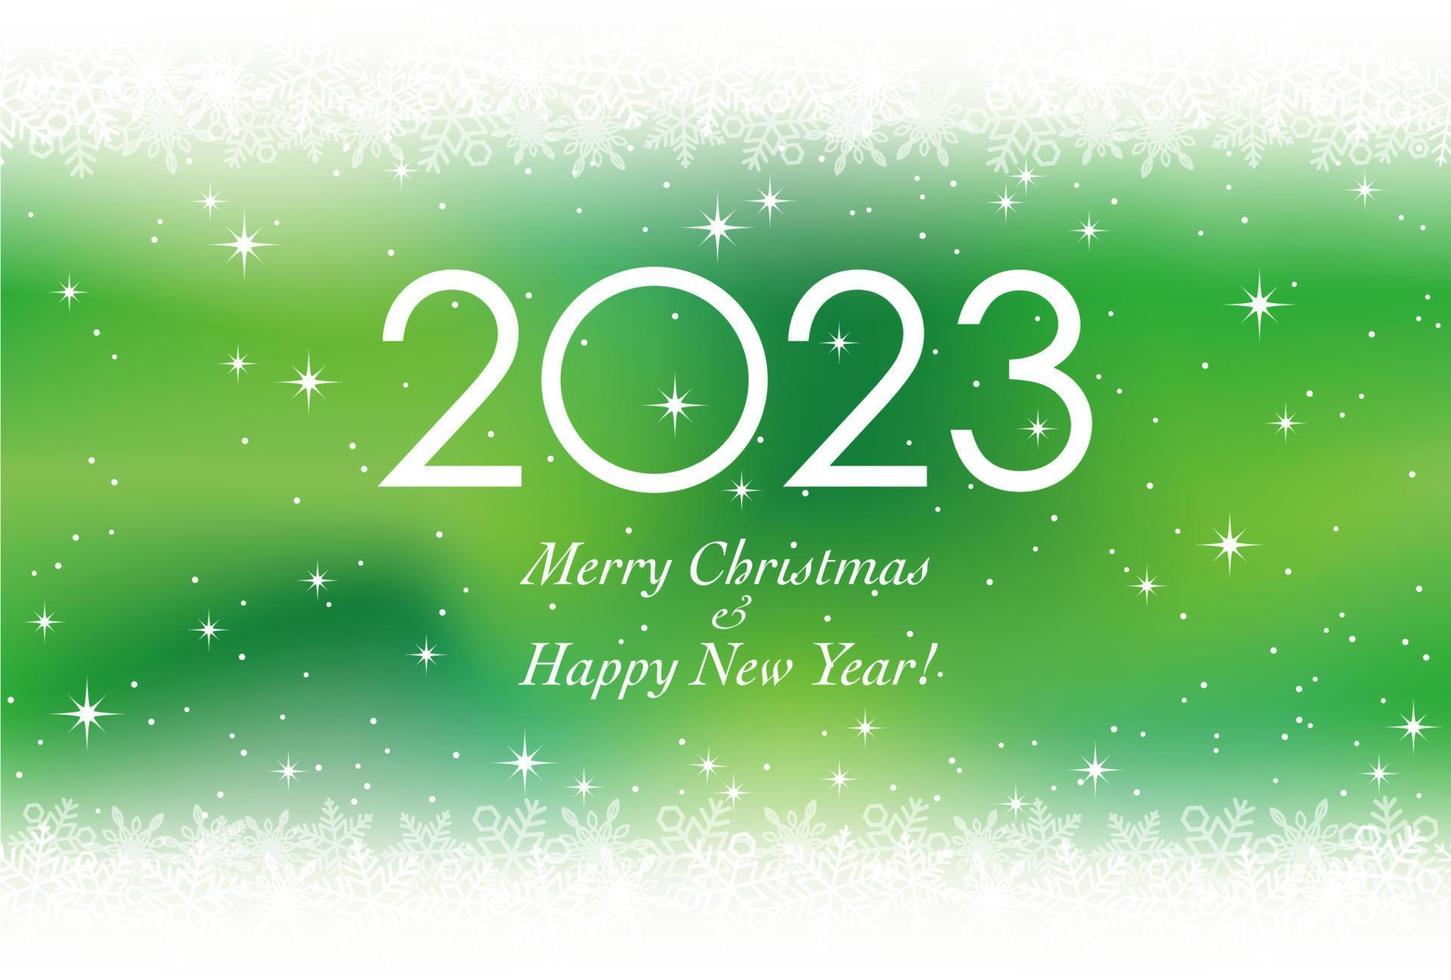 The Year 2023 Christmas And New Years Greeting Card With Snowflakes On A Green Background. Vector Illustration.